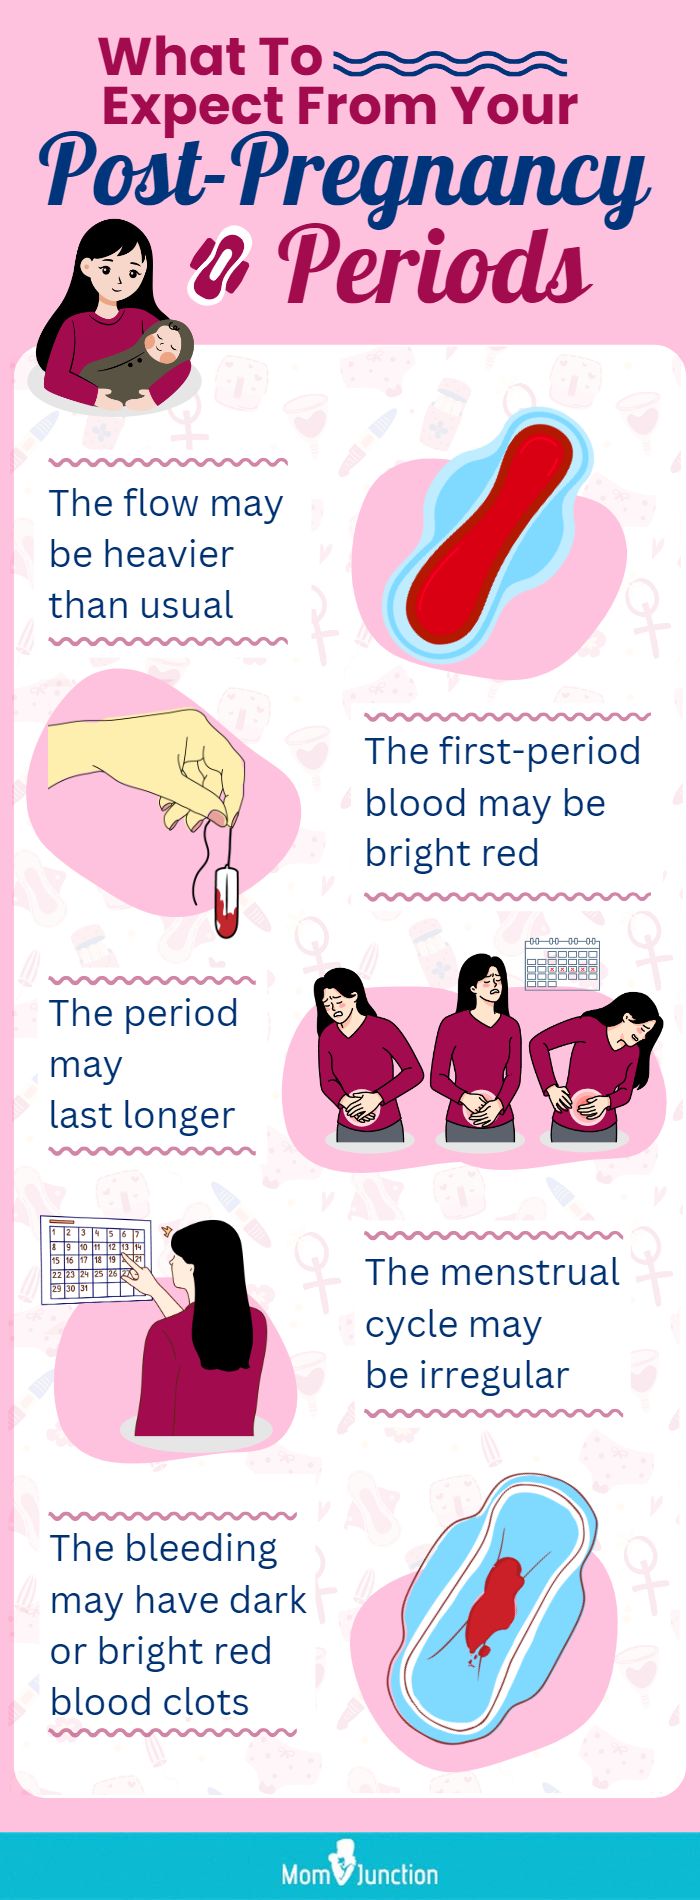 All About Your First Period After Having a Baby